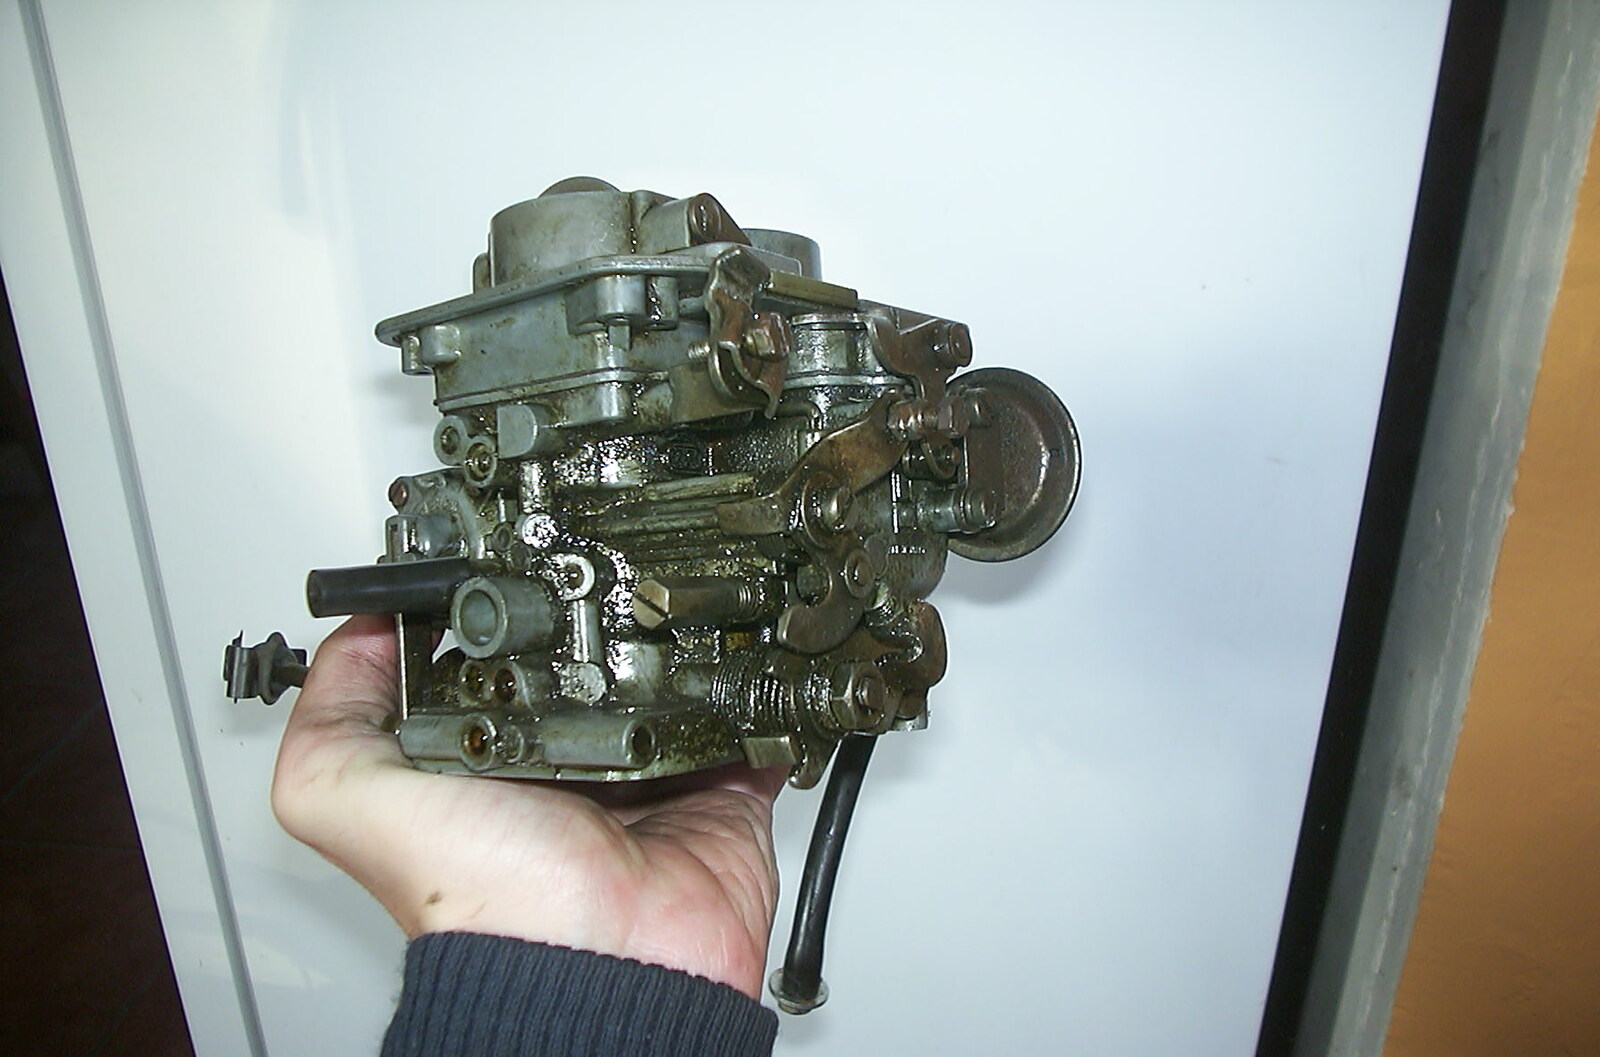 The re-assembled carburettor from The House in Snow and a Carburettor, Brome, Suffolk - 20th December 2002